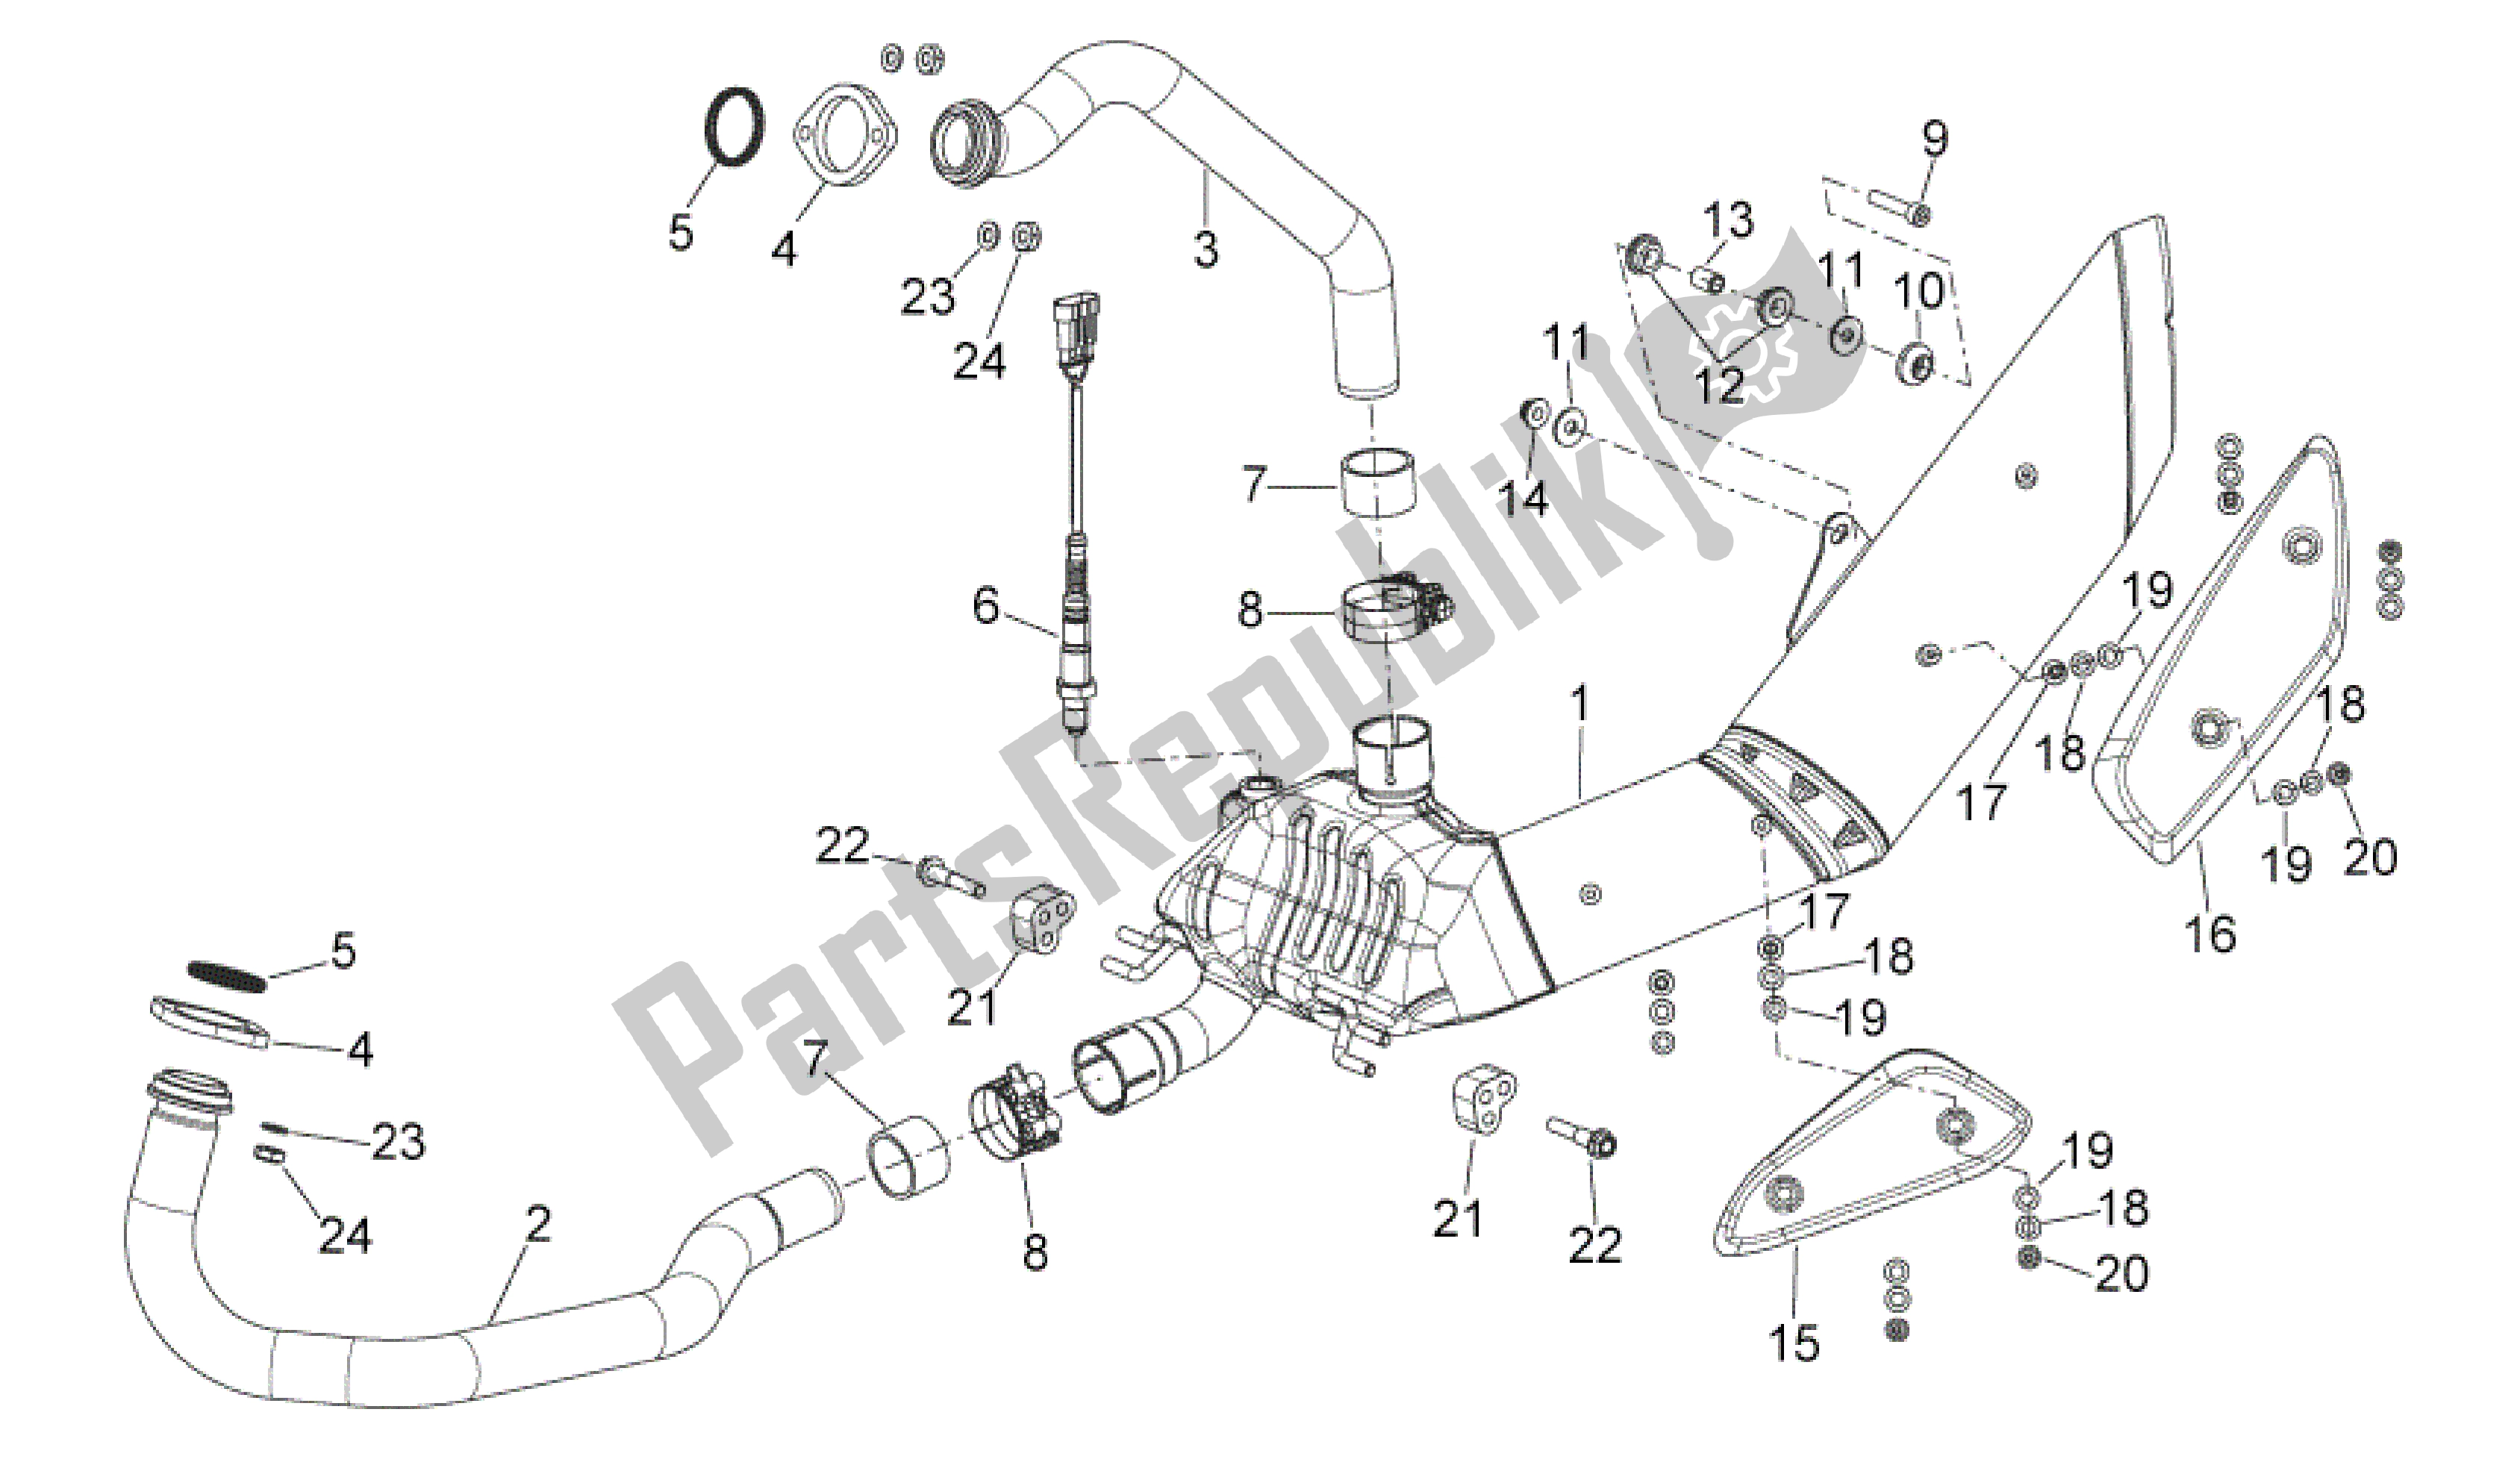 All parts for the Exhaust Unit of the Aprilia Mana 850 2009 - 2011